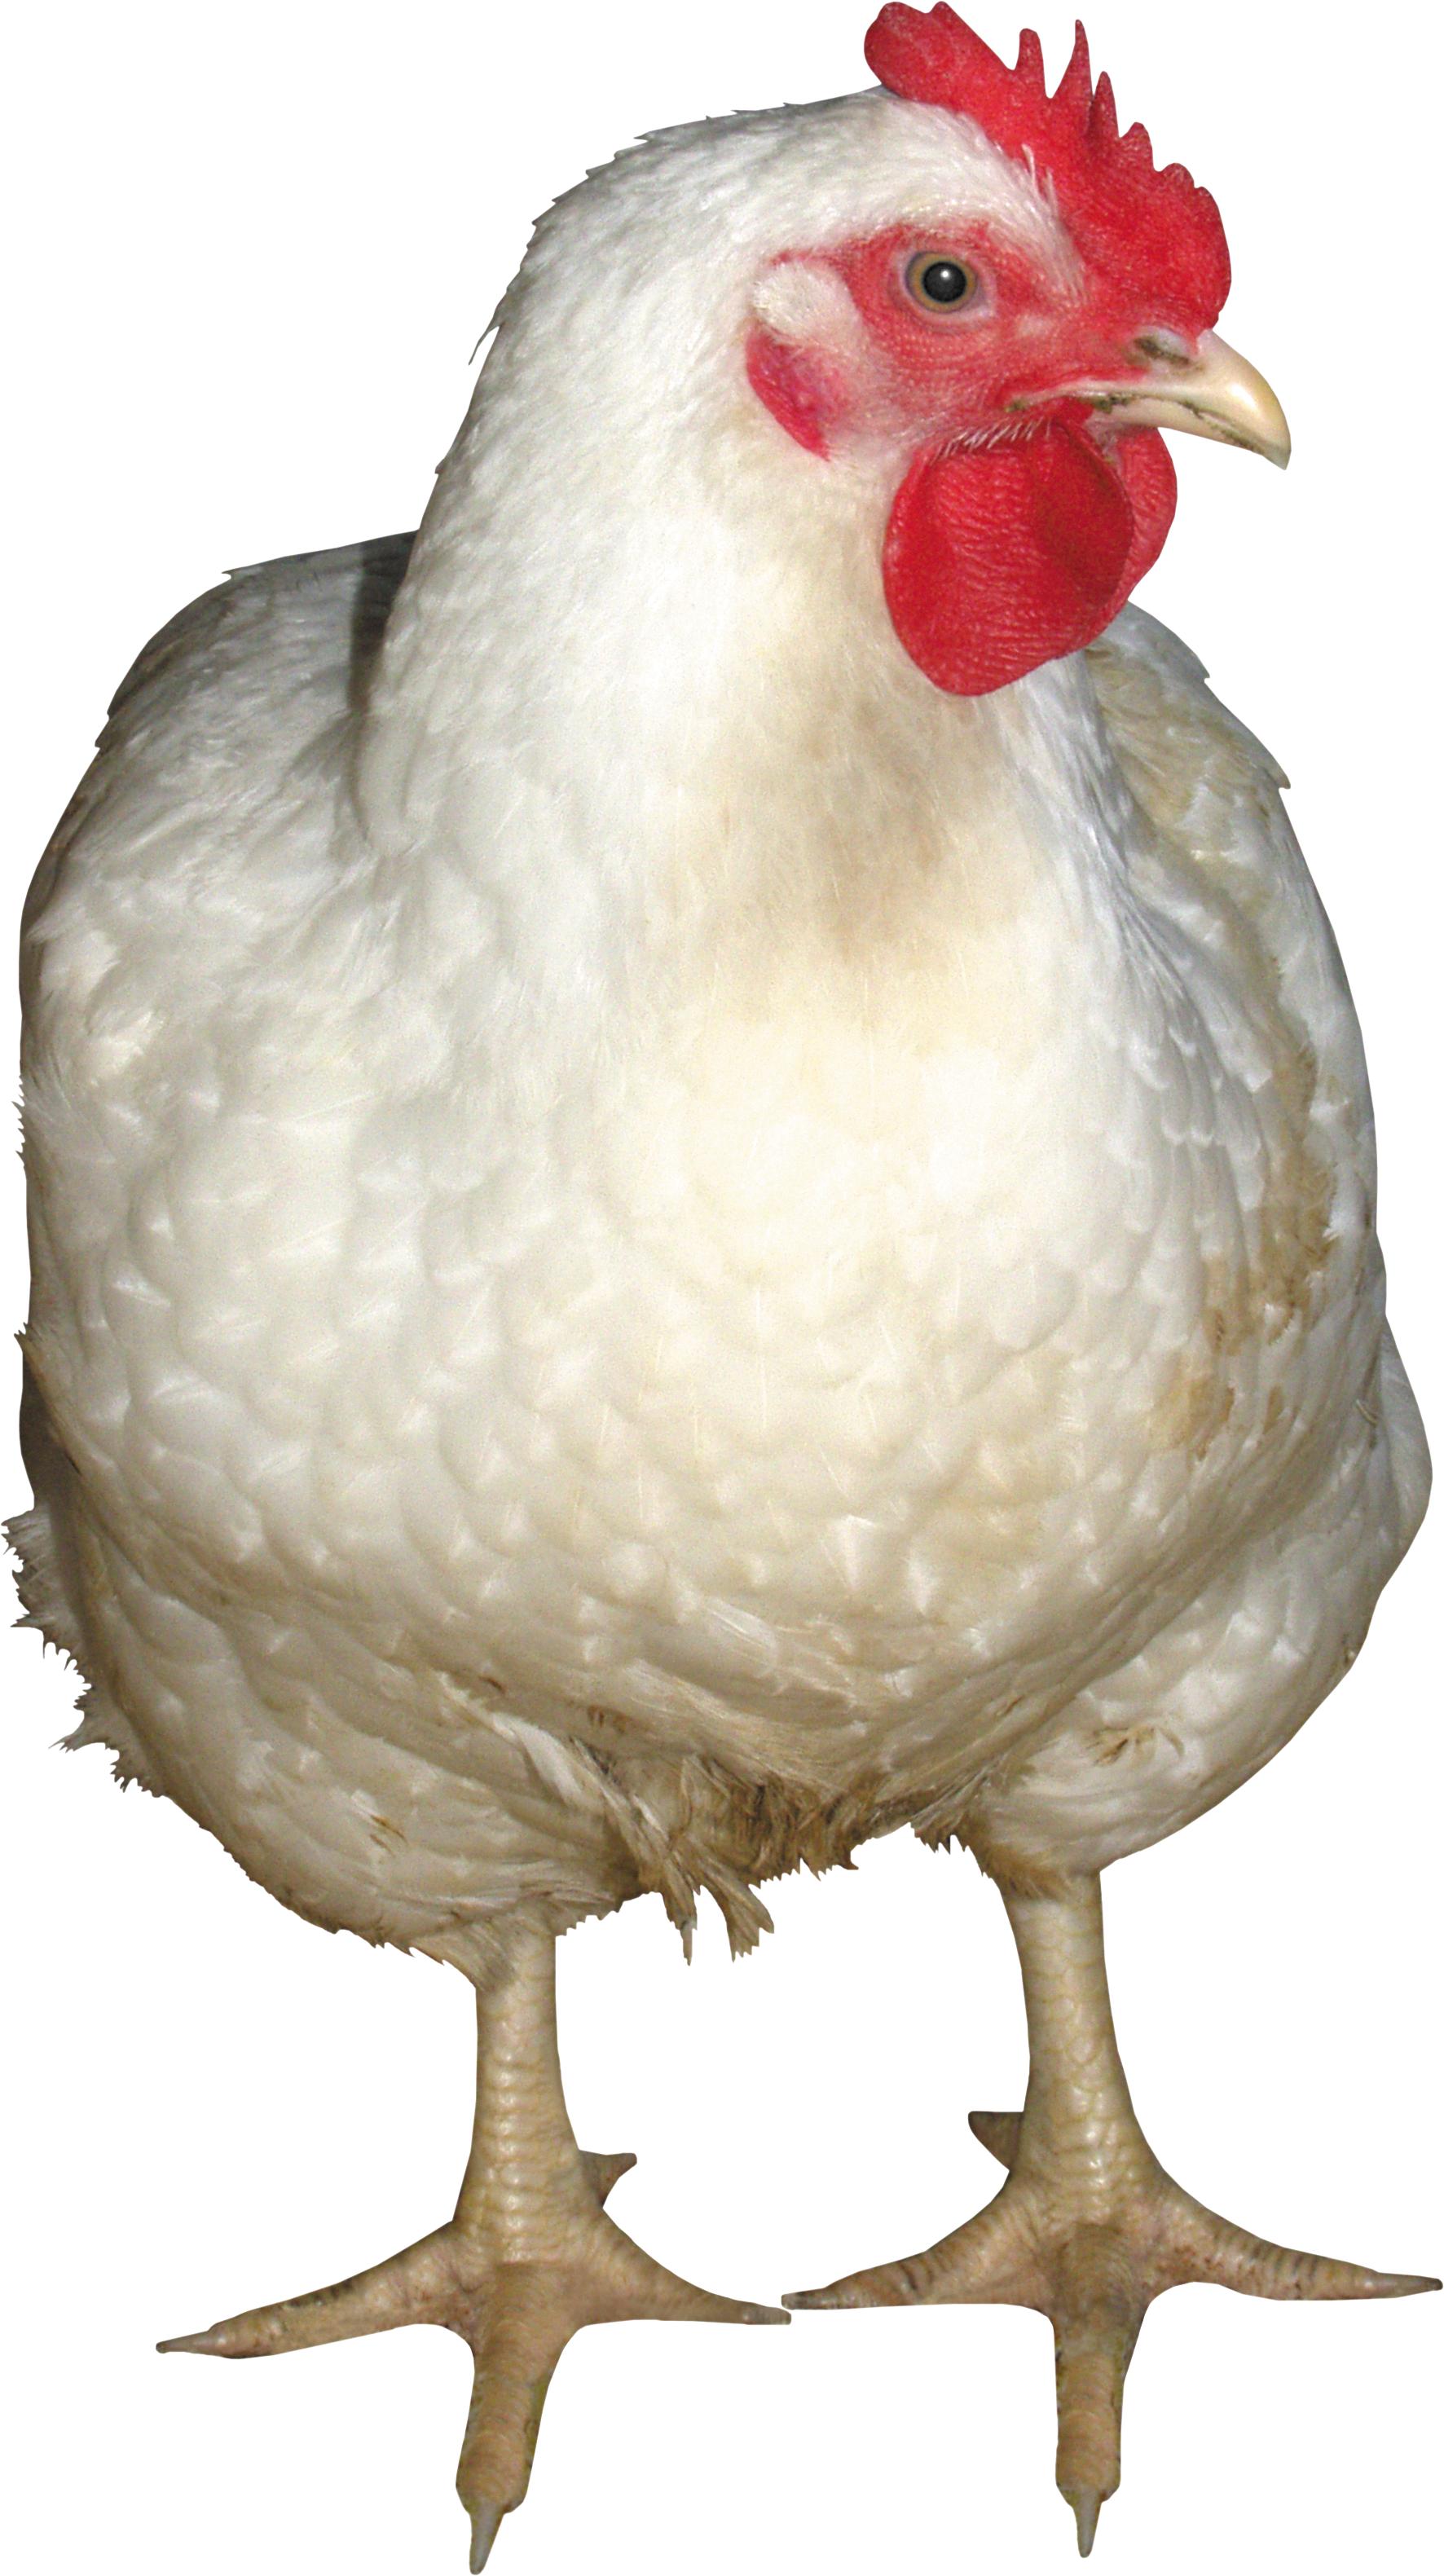 Chicken PNG images, free chicken picture download.